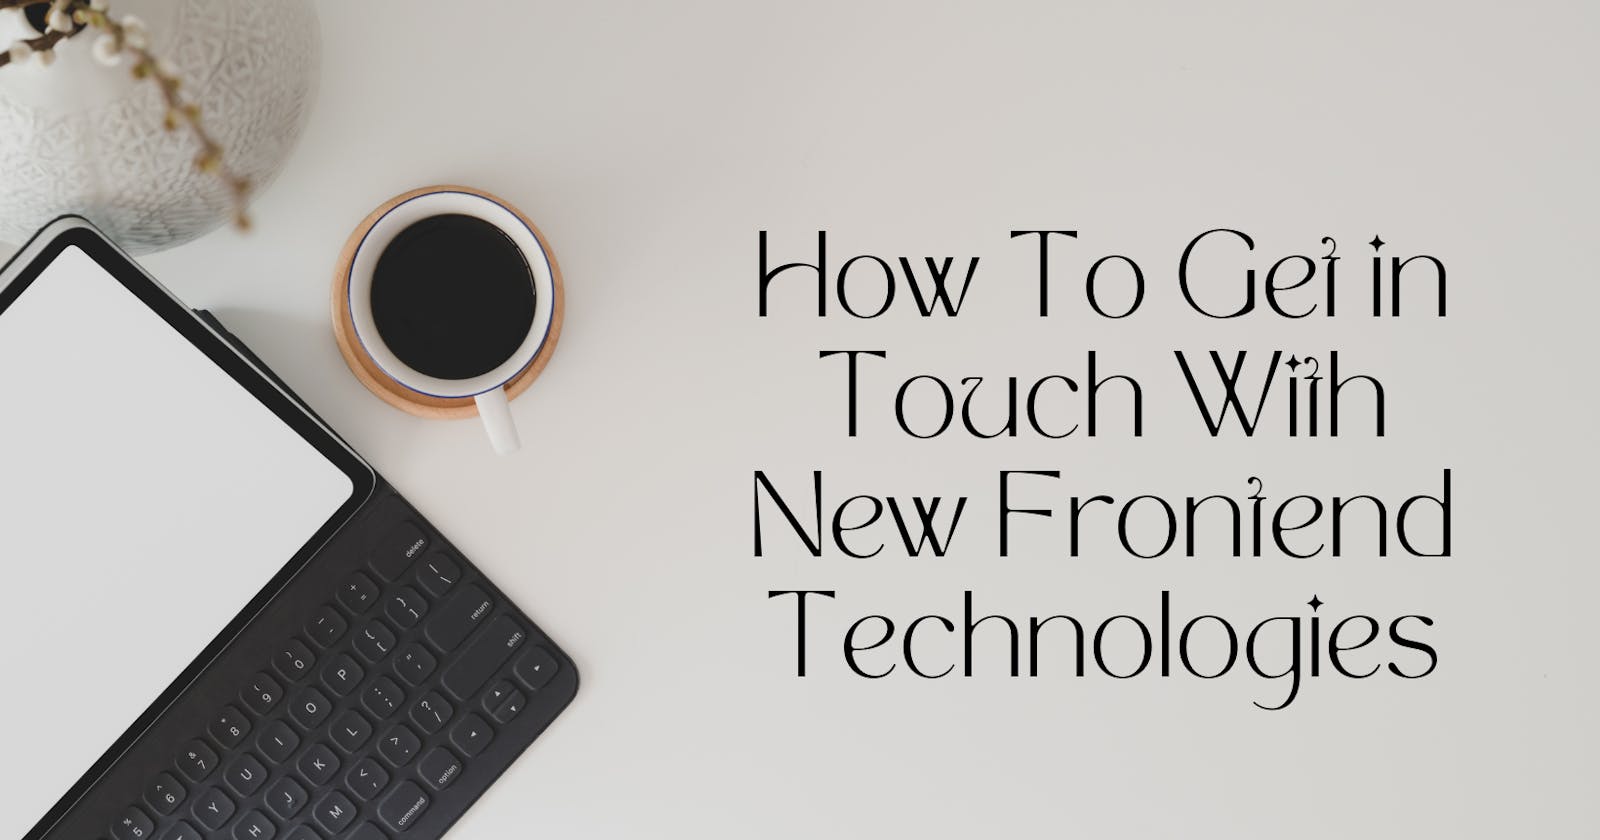 How To Get in Touch With New Frontend Technologies